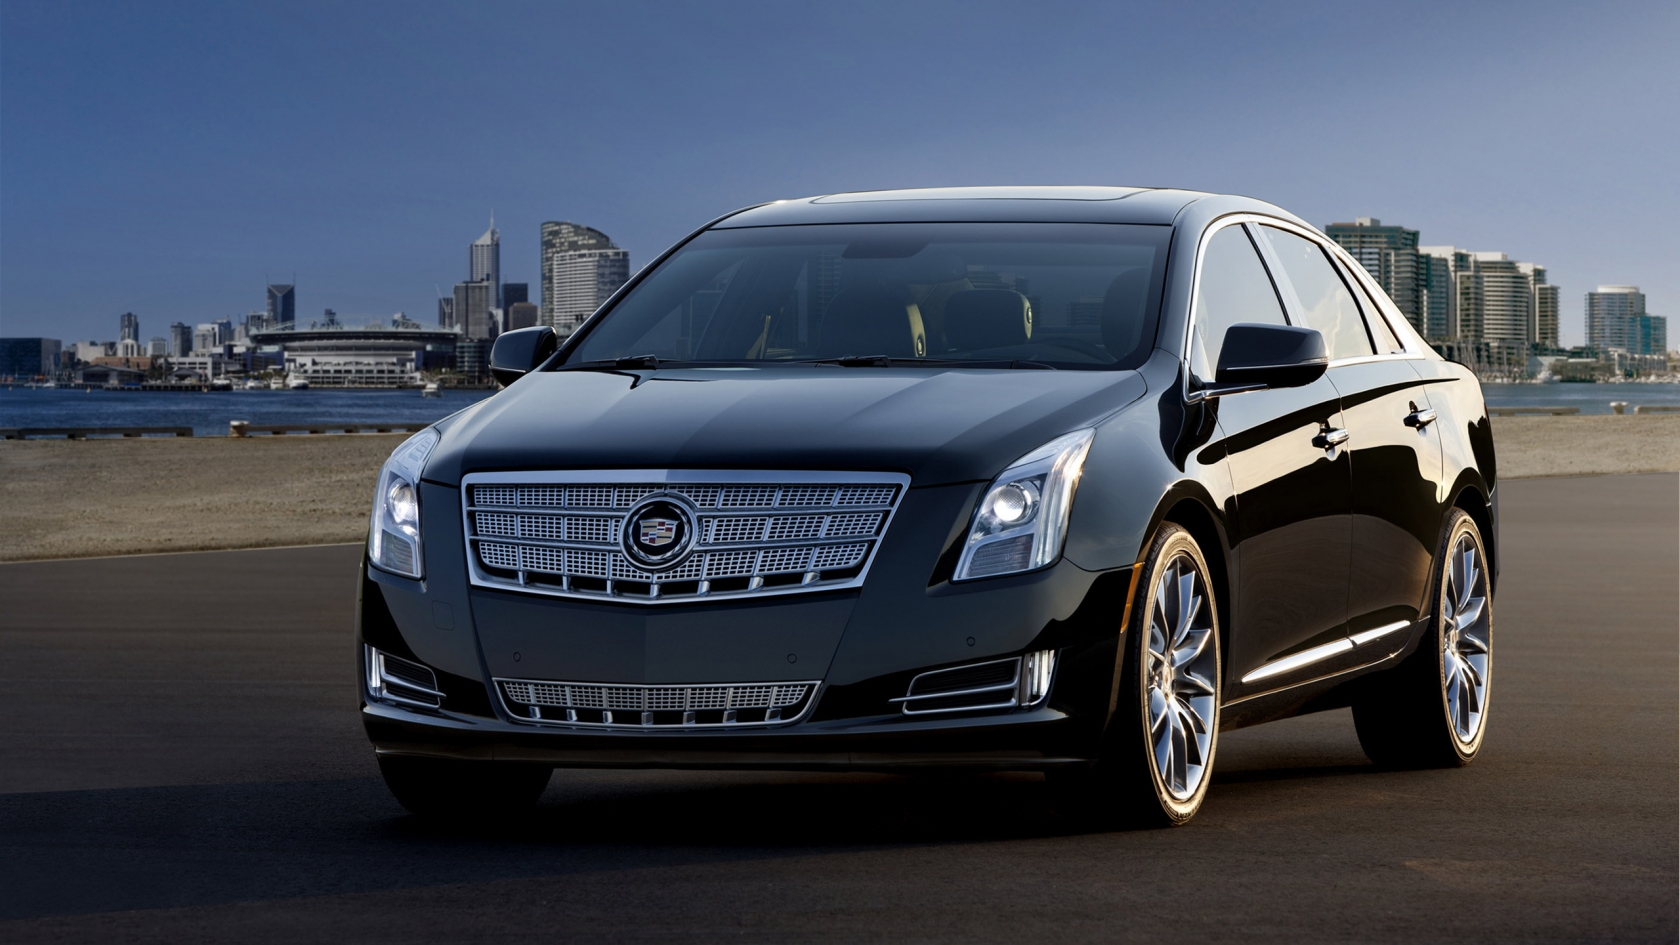 Cadillac XTS 2013 Edition for 1680 x 945 HDTV resolution